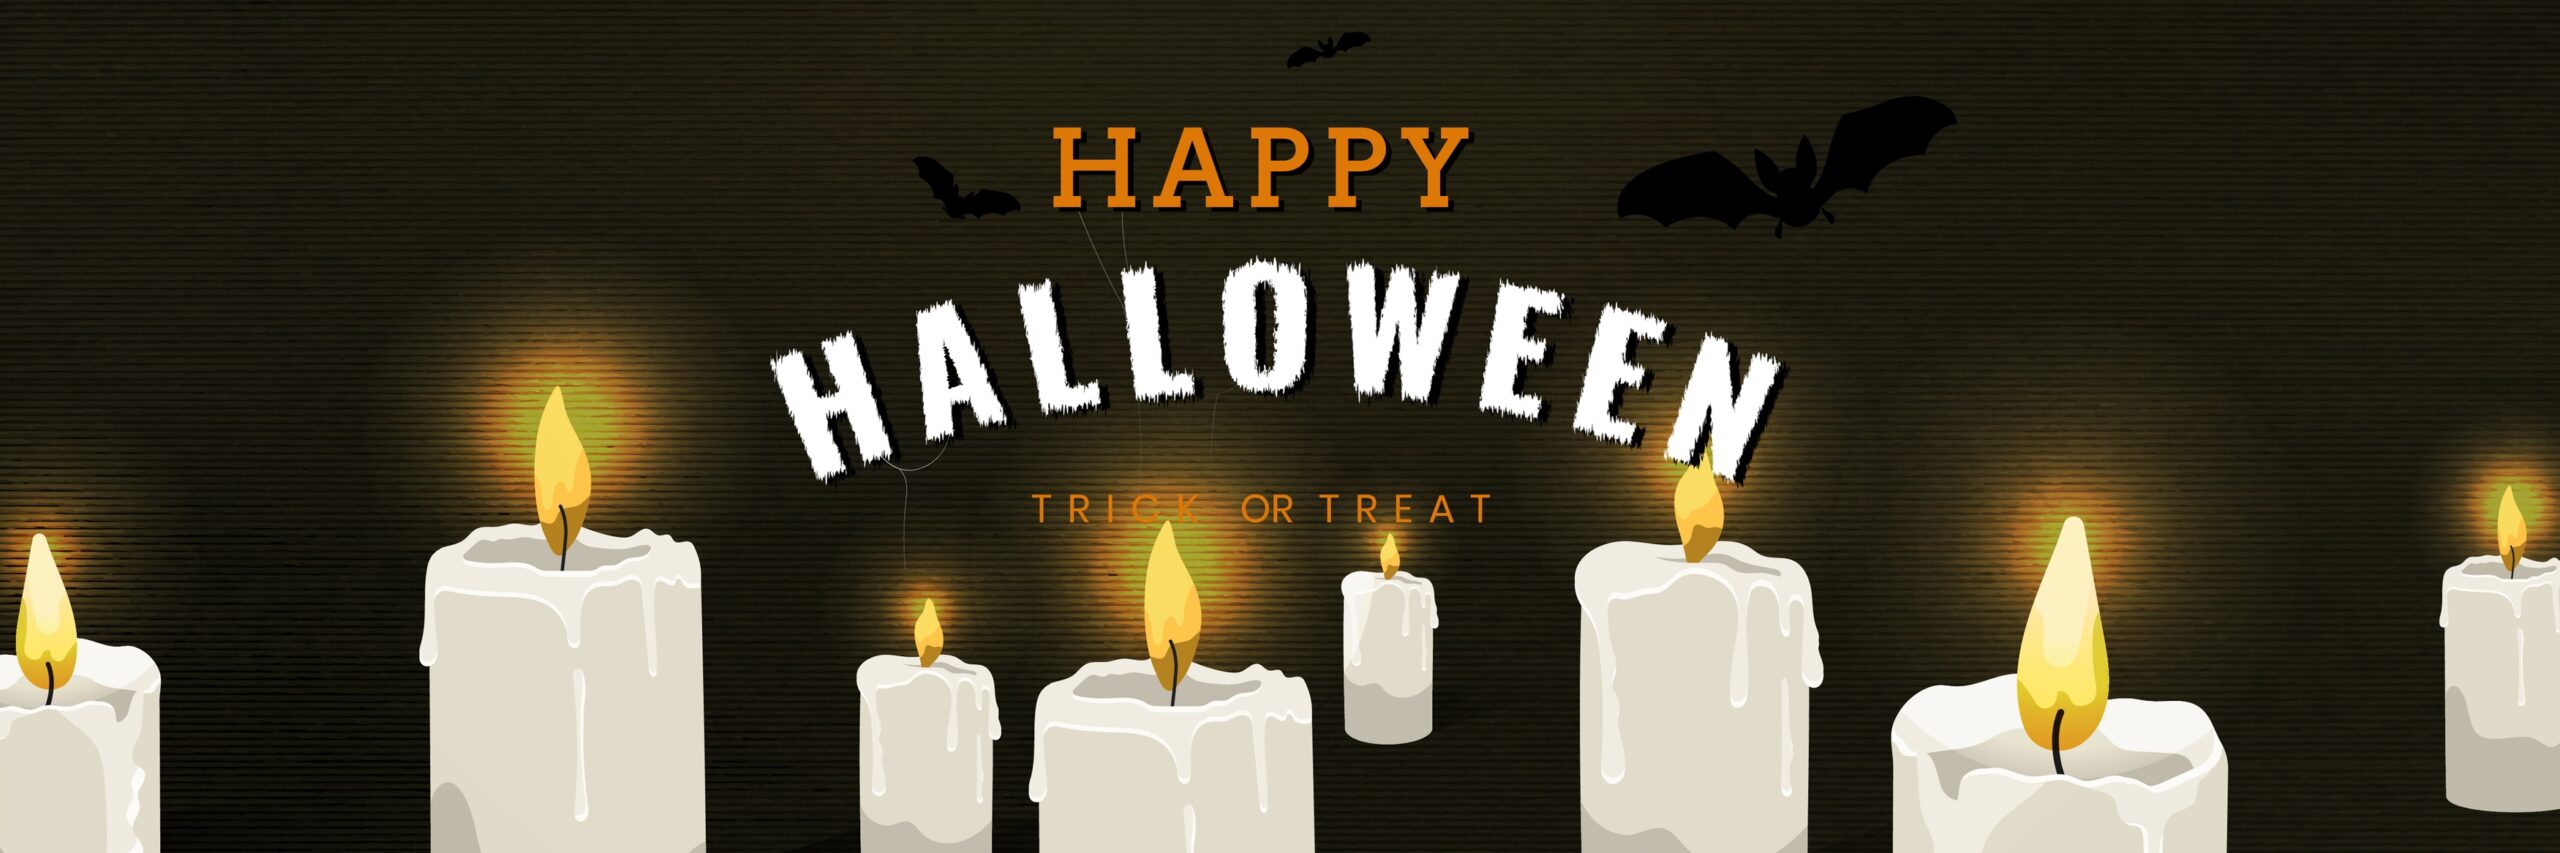 HAPPY HALLOWEEN TRICK OR TREAT on a black background above lit candles to celebrate the season of candy